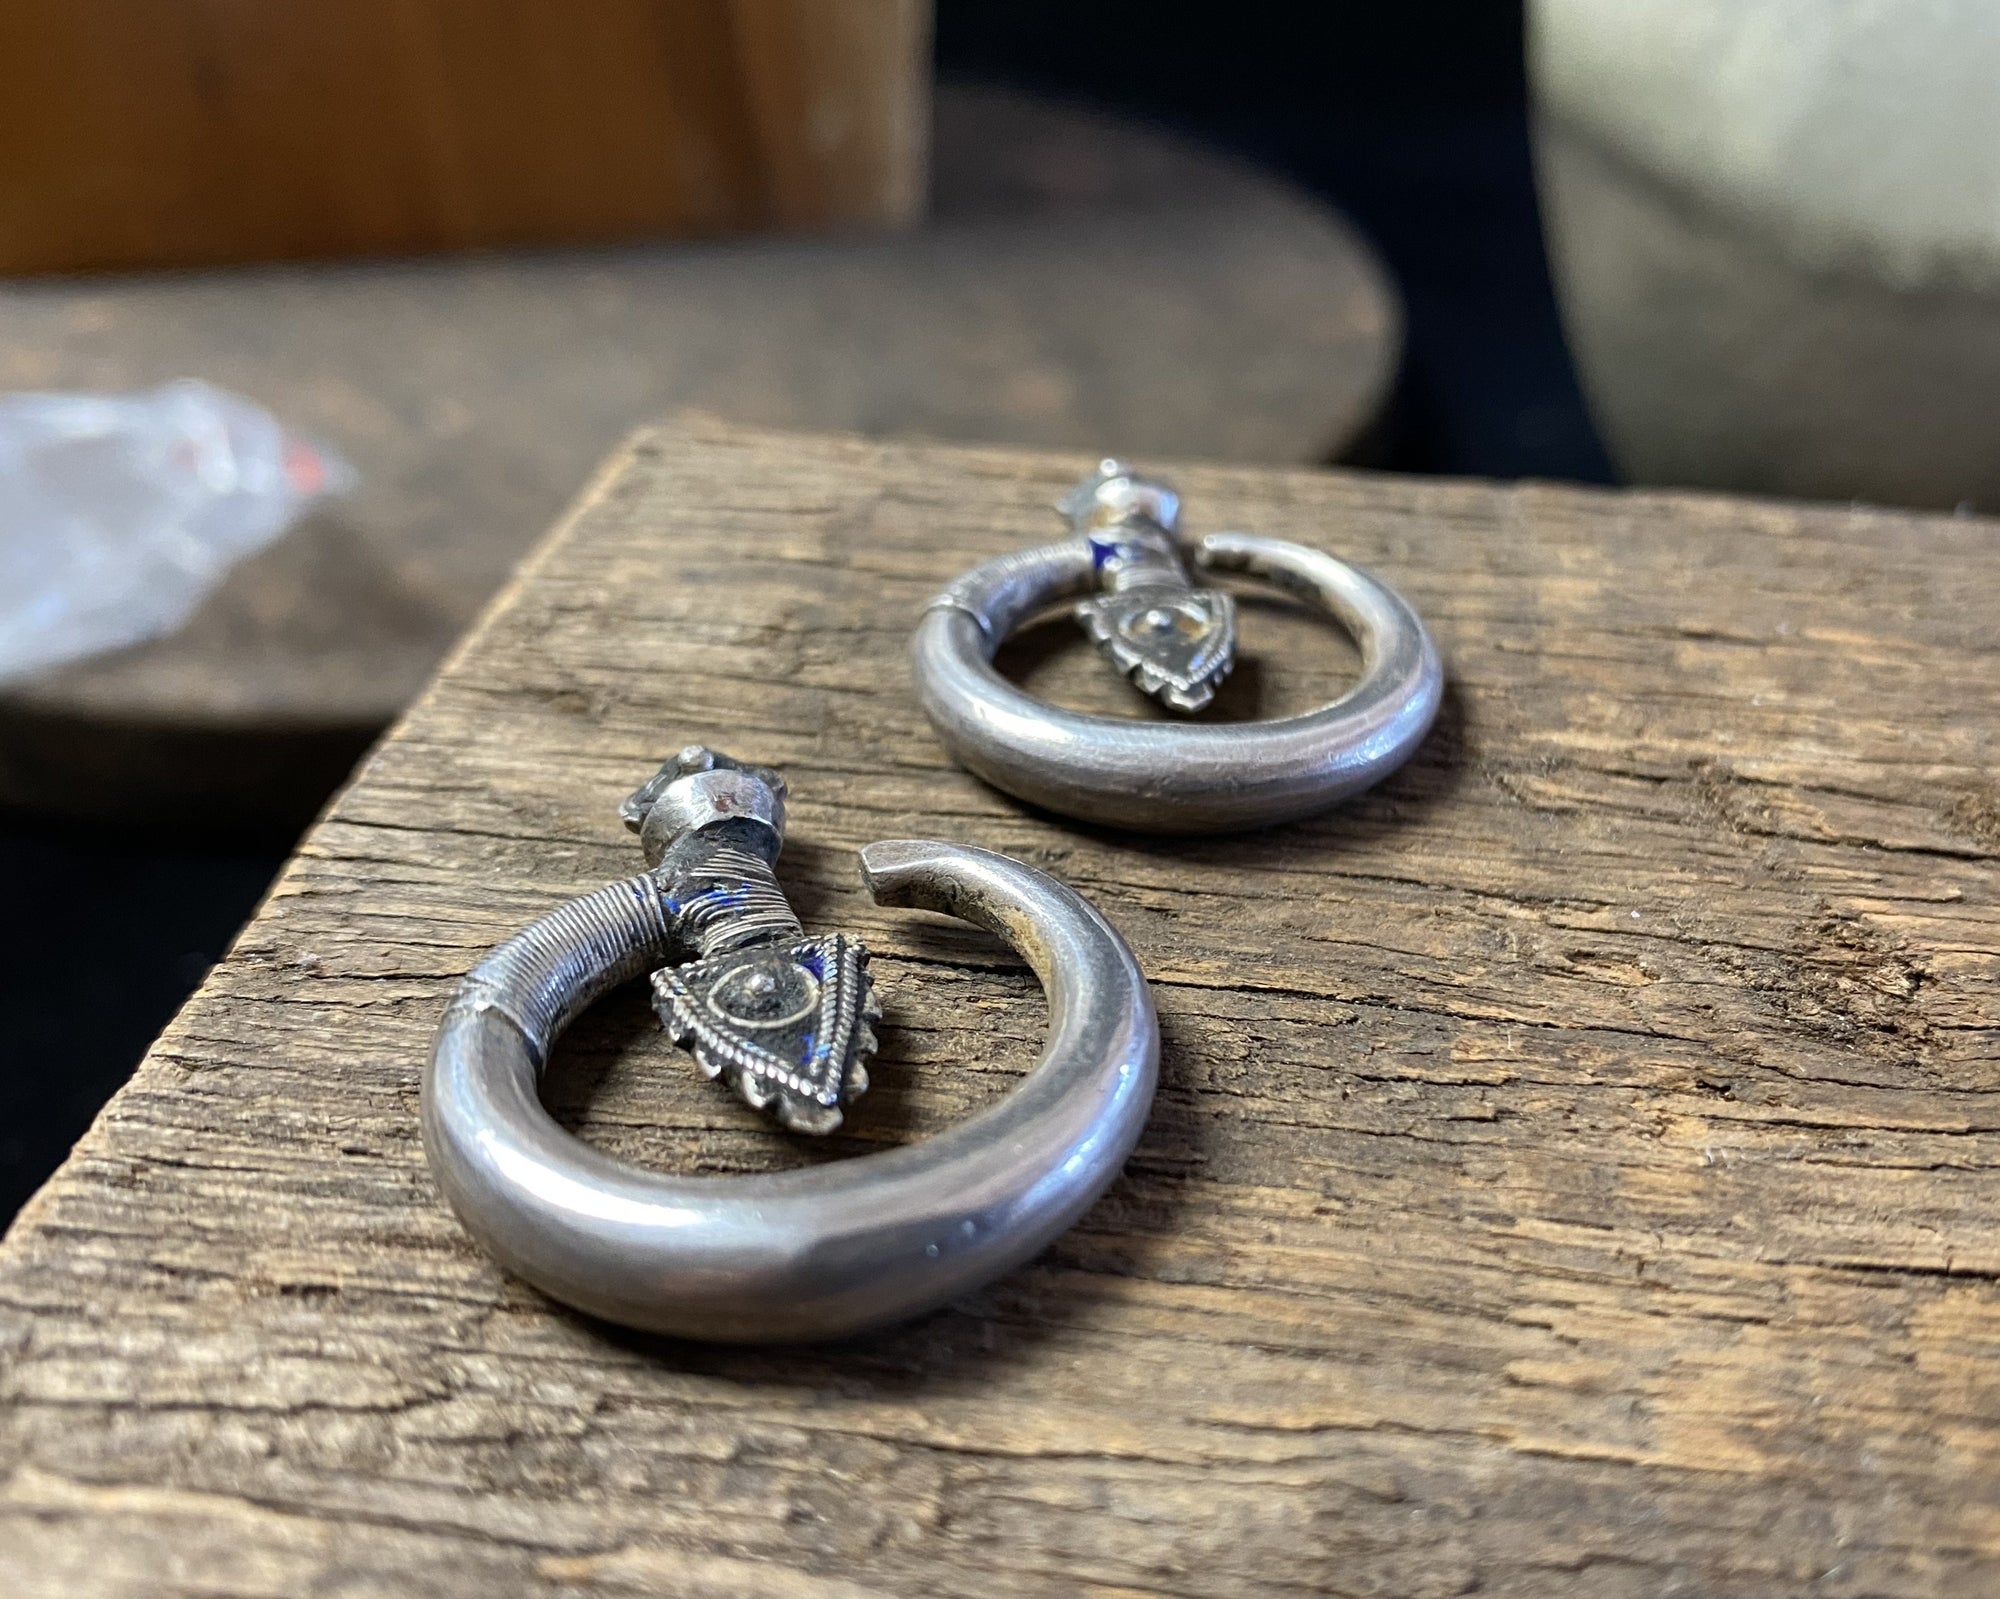 Tribal silver earrings called Bent Arrow. Worn pushed sideways through the ear by Yao women. High grade silver, they can only be worn with an extended piercing